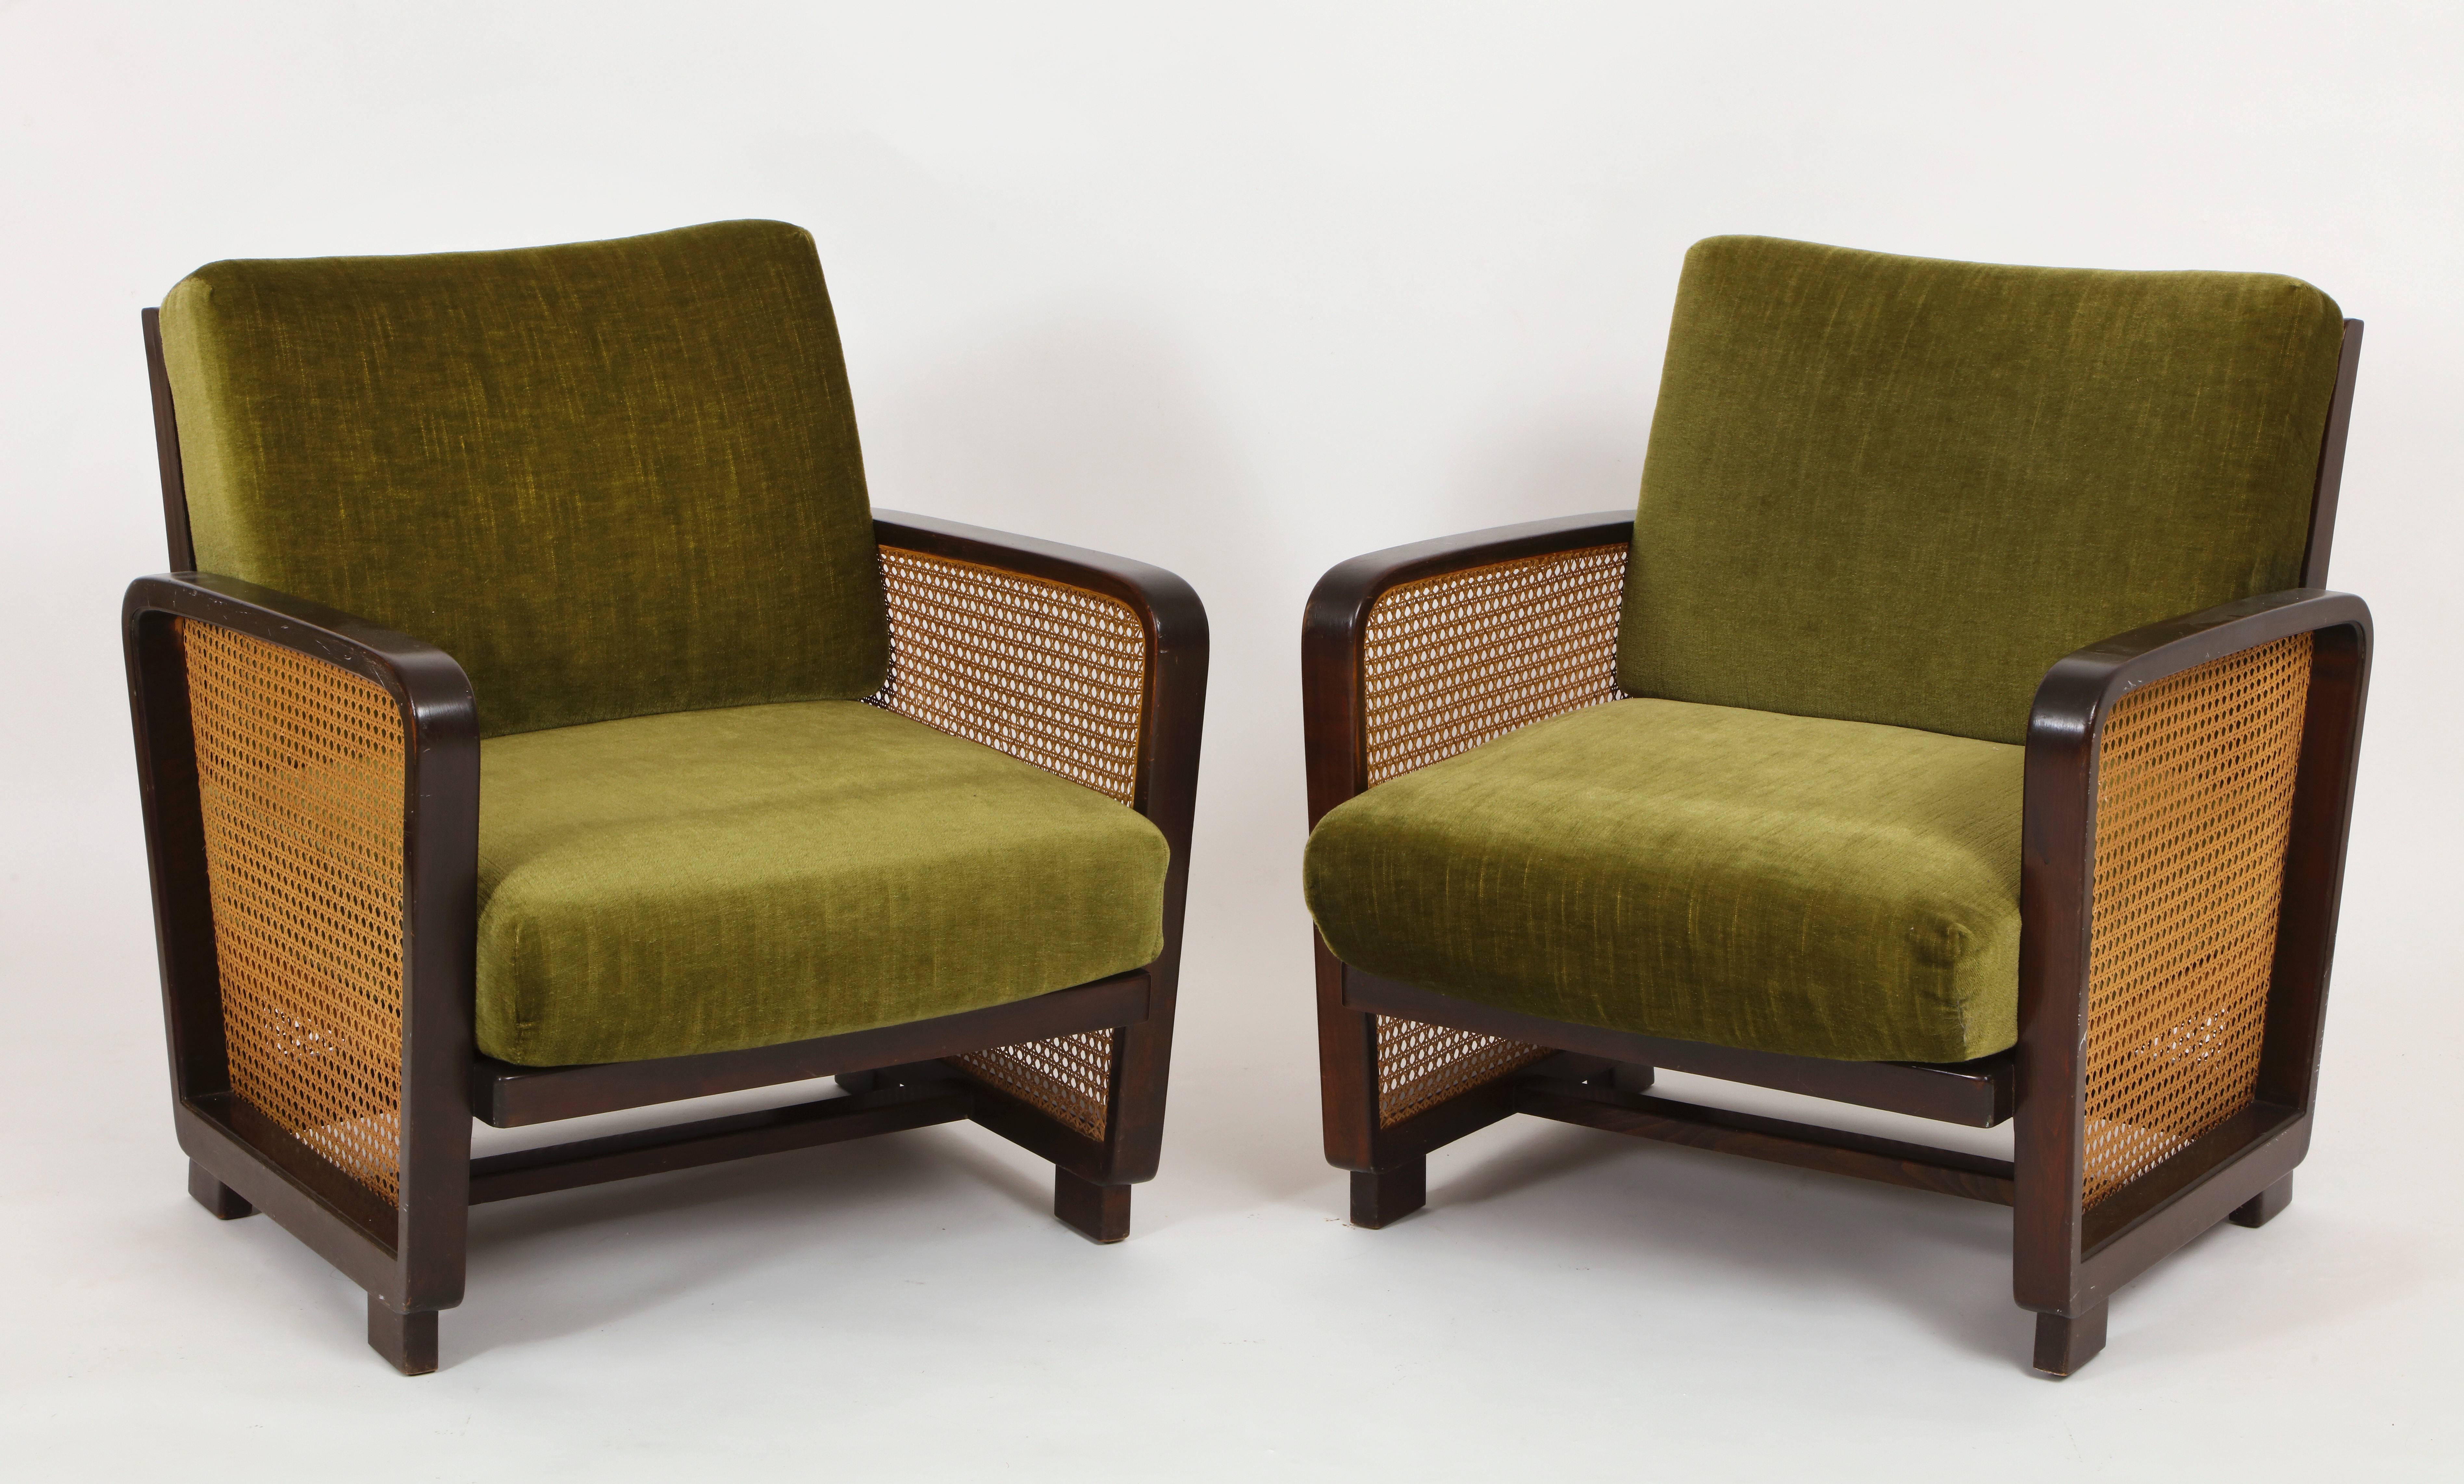 Green velvet woven wicker rattan chairs deco, modernist, Mid-Century, France 1930, 1940, 1950.
Woven rattan chairs, with original mohair velvet fabric.
In excellent condition for its age.

Measures: 50 cm deep.
77 cm height.
75 cm wide.